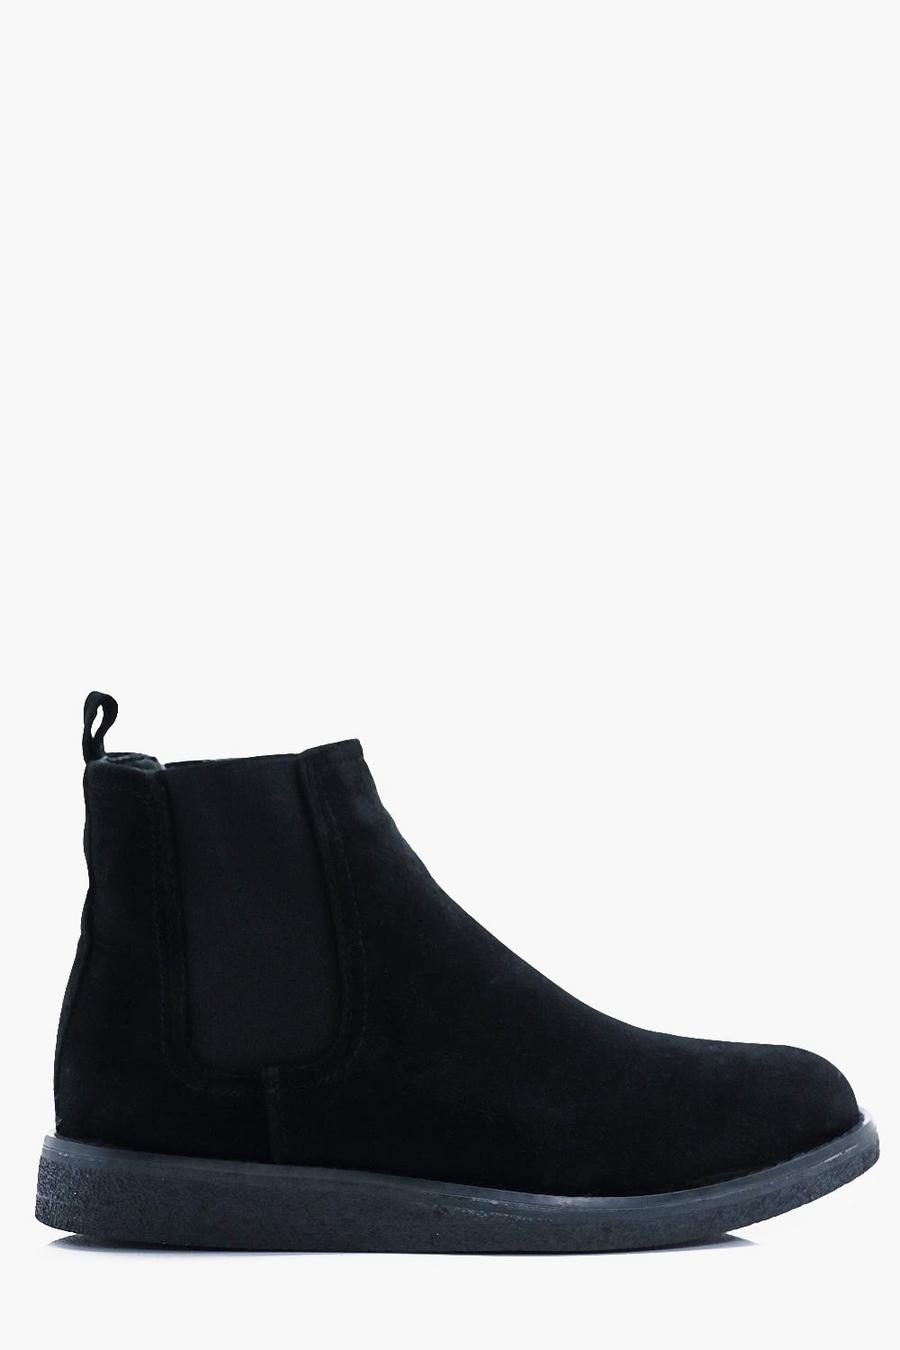 Wedge Sole Chelsea Boots, Black image number 1